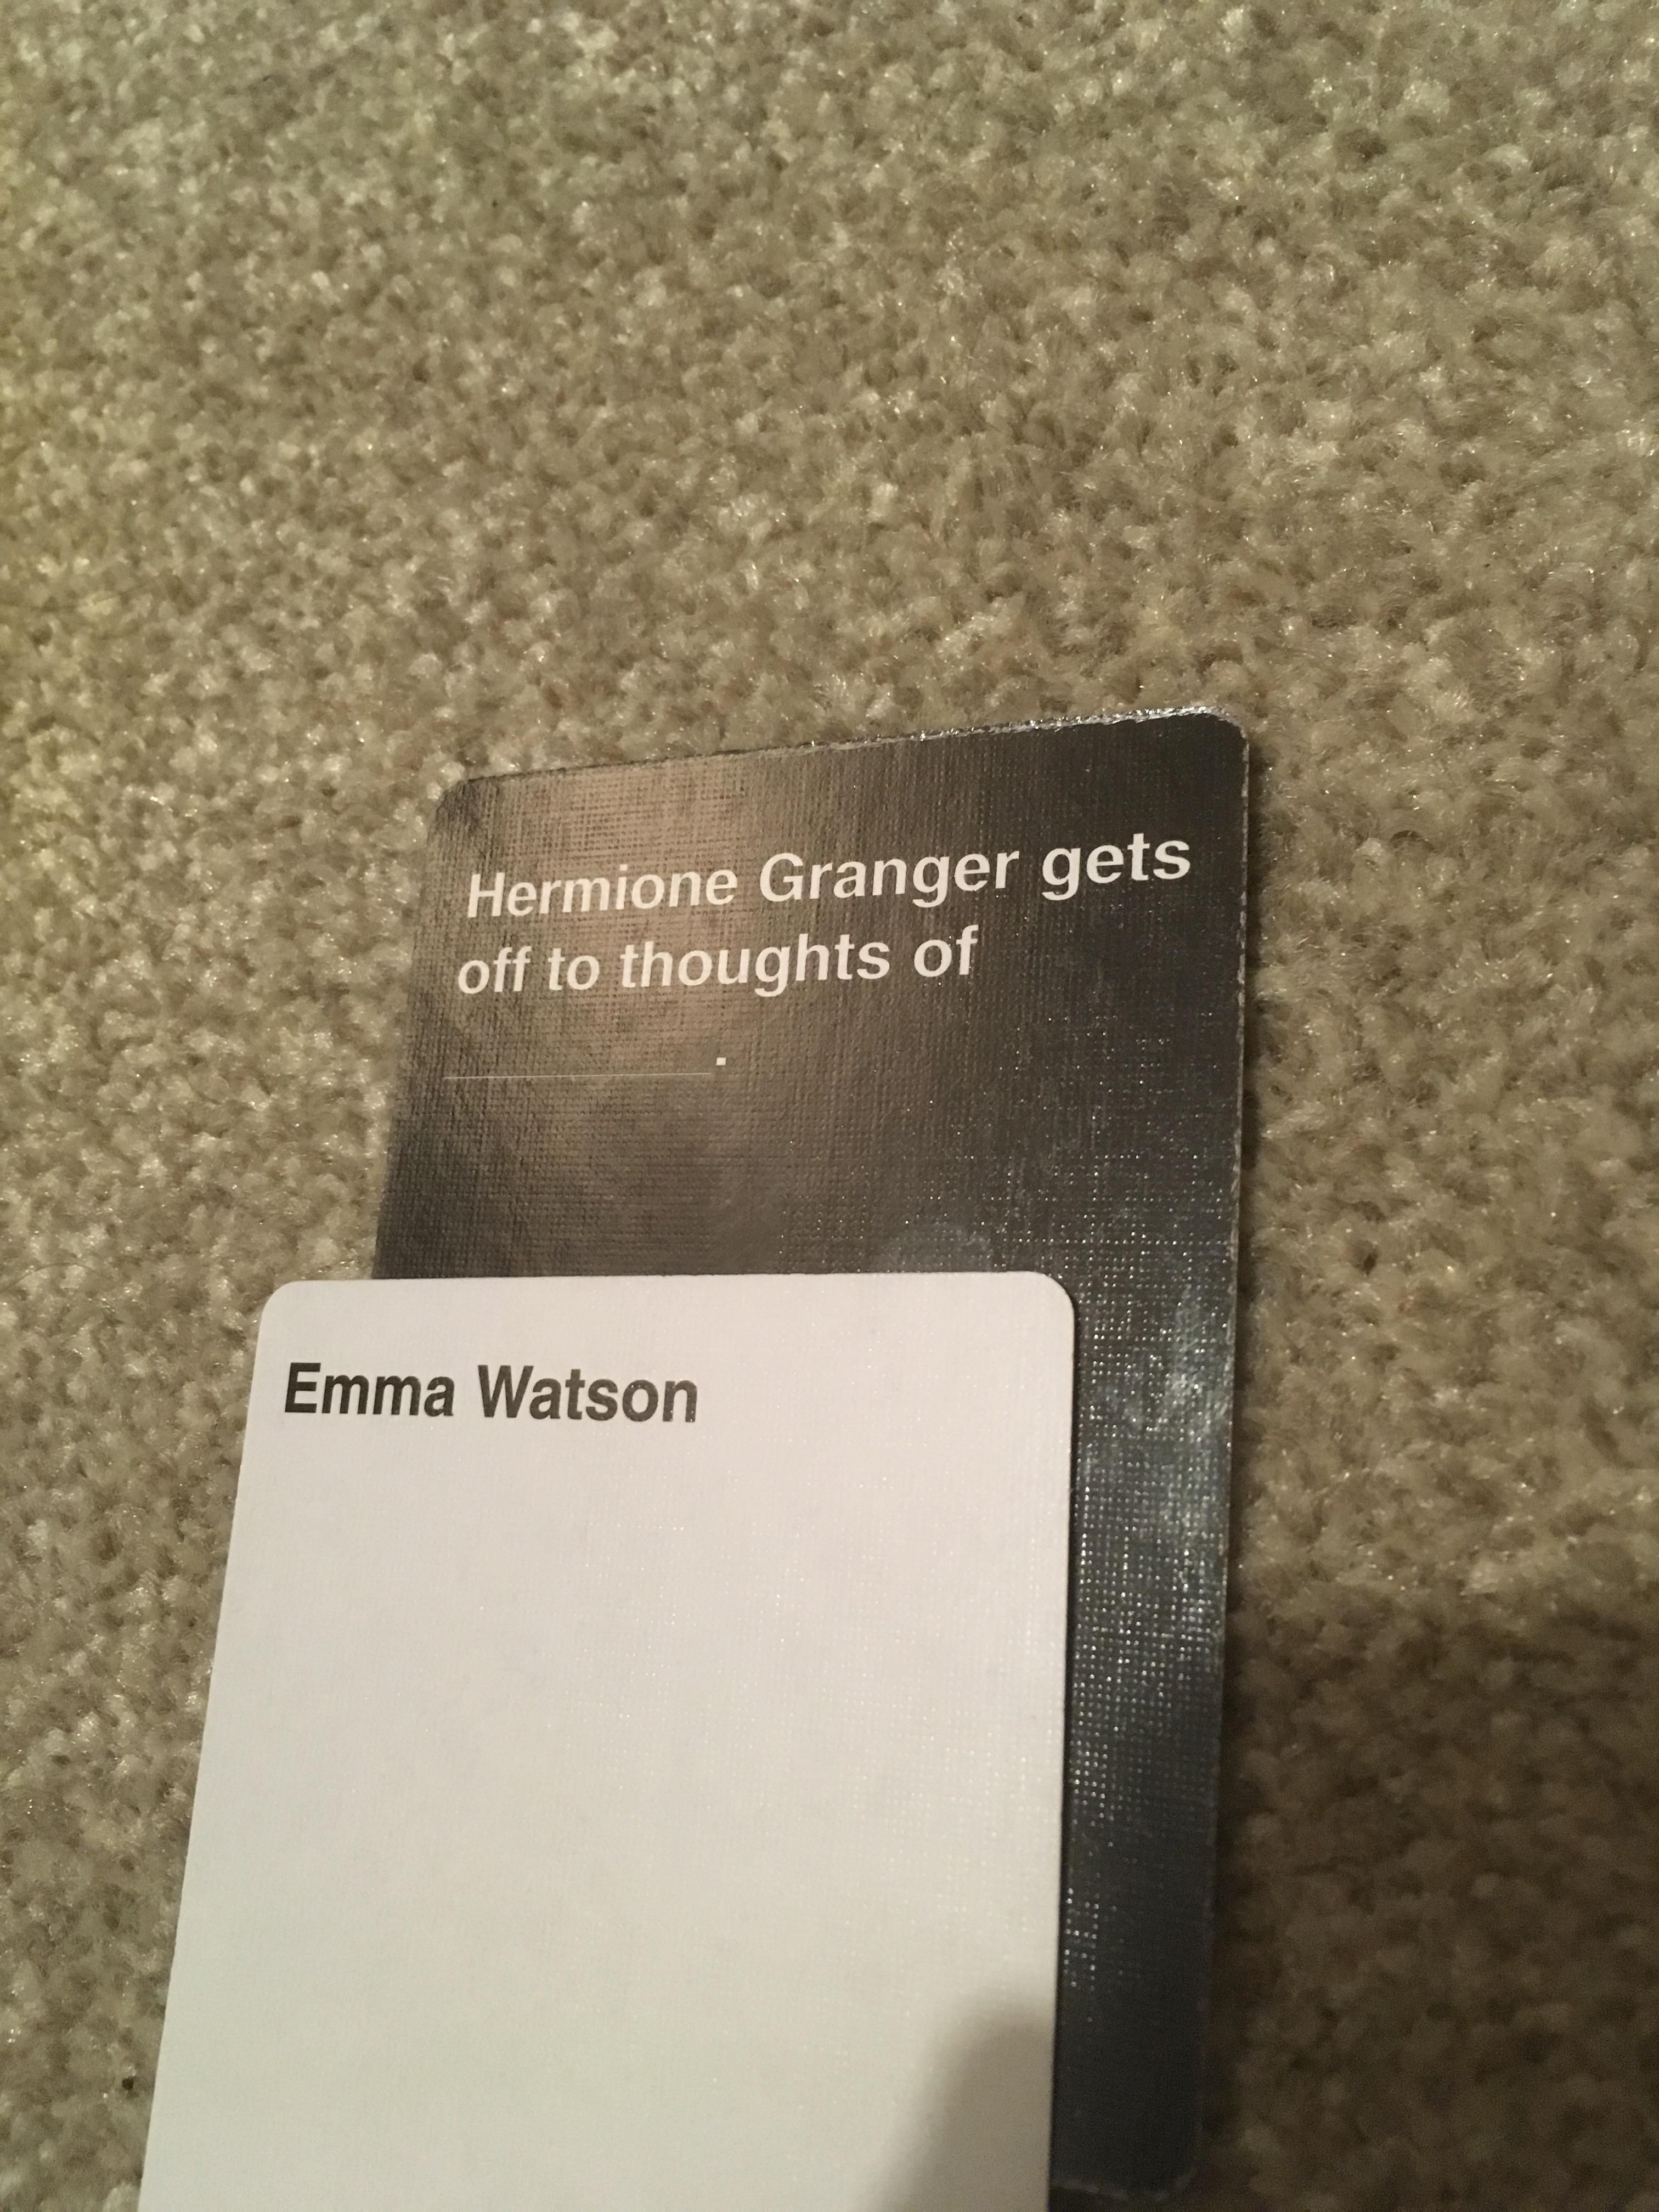 Cards against muggles has some great combos